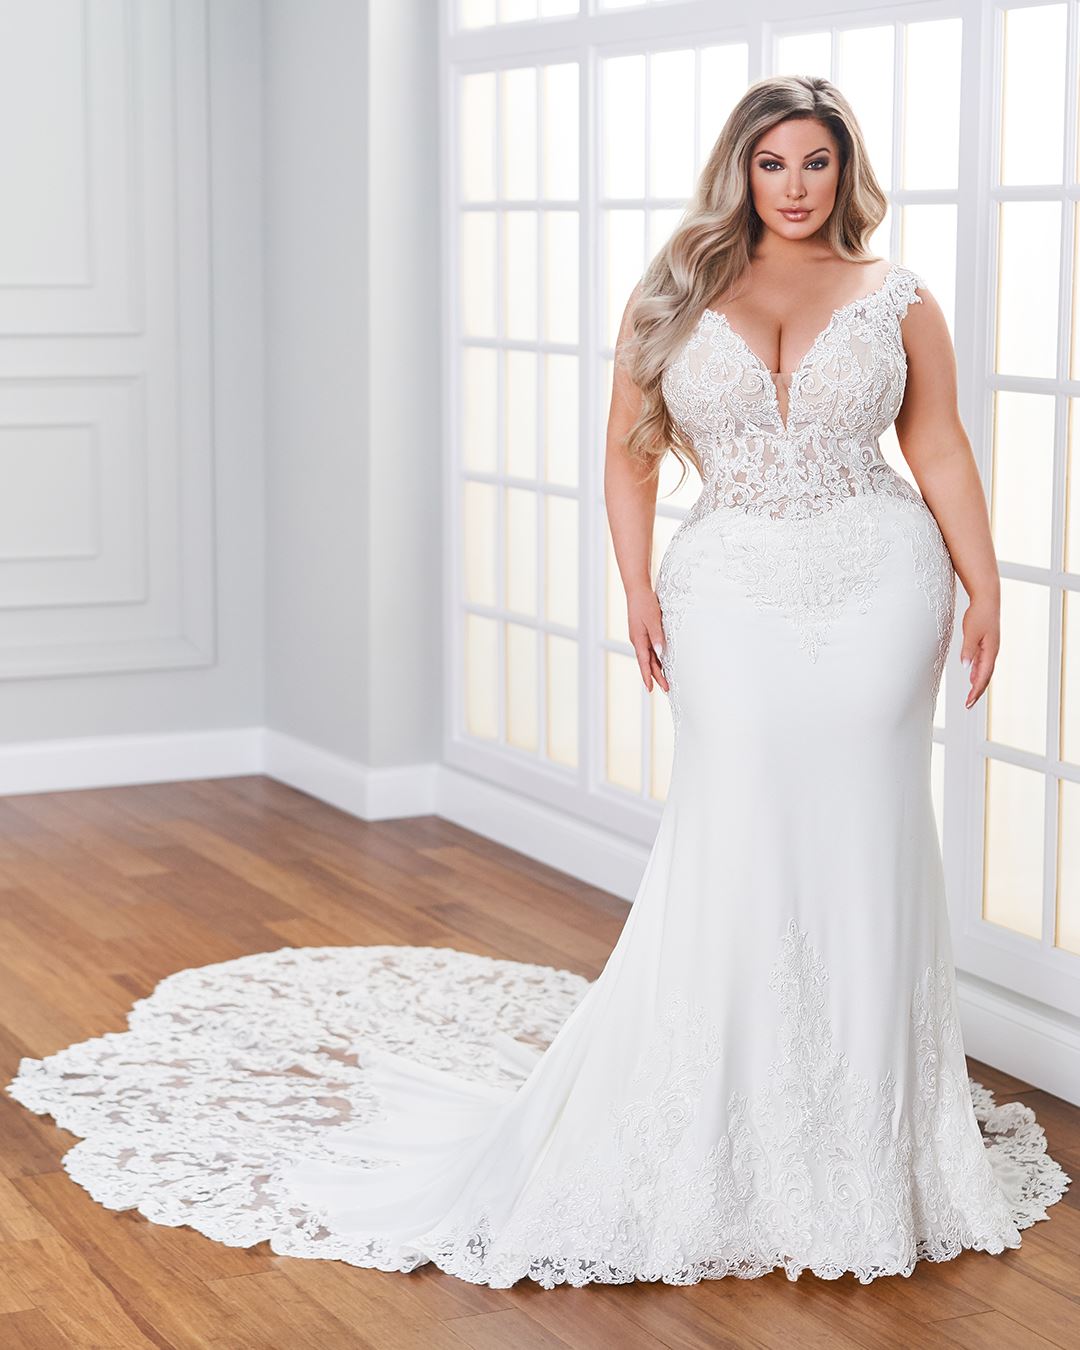 Bride wearing fit and flare wedding dress with cap sleeves